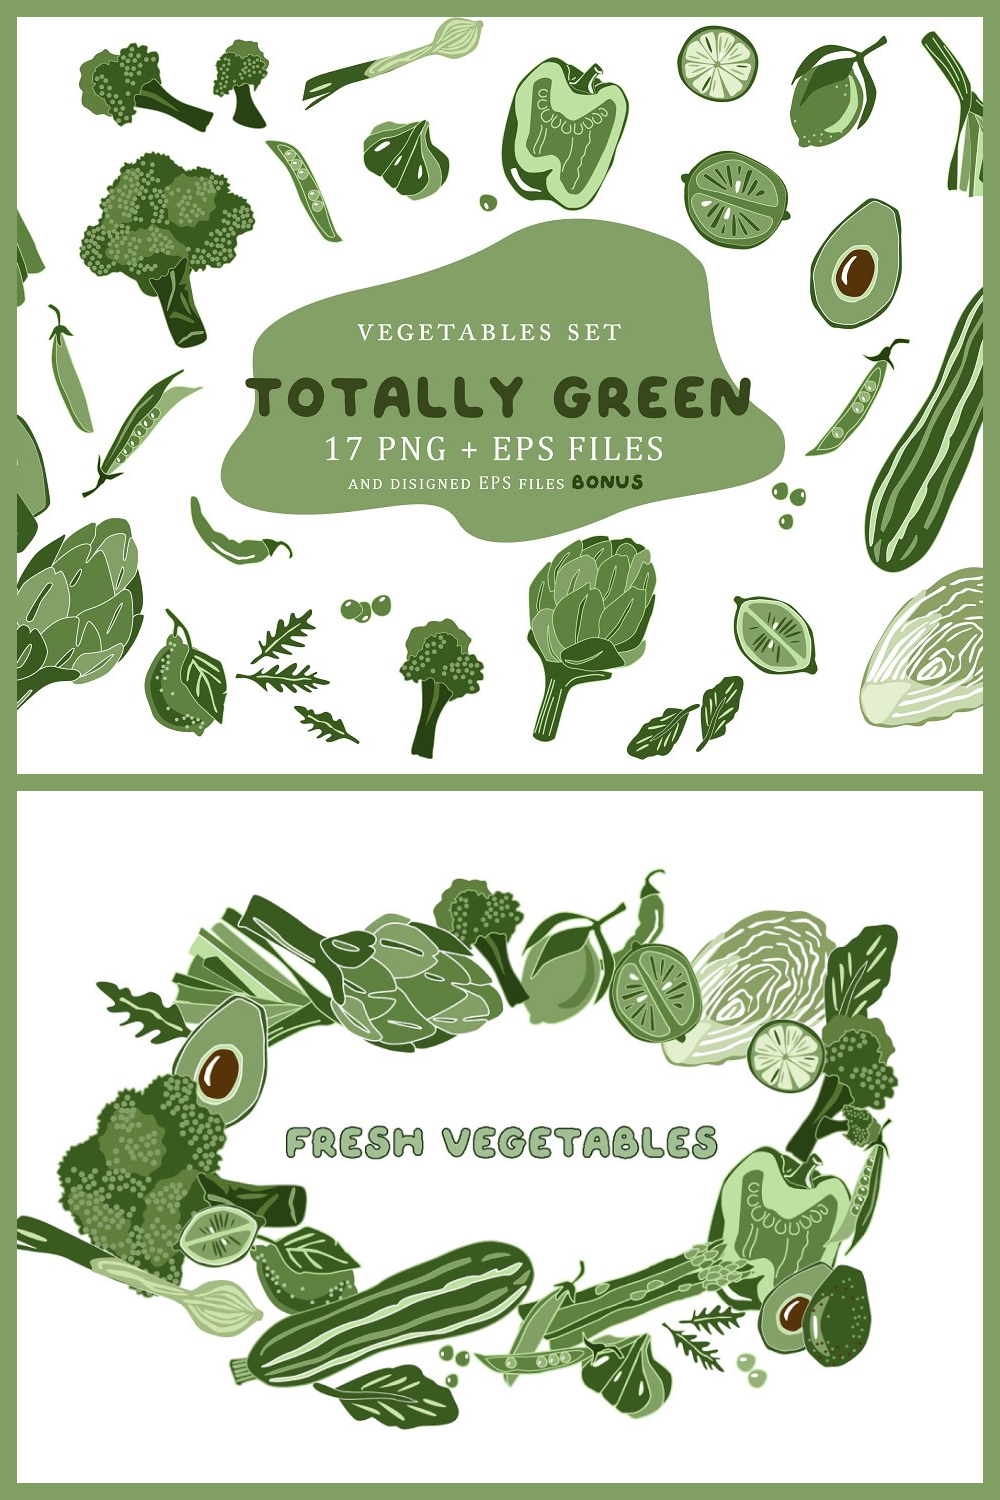 Vegetables set totally green - pinterest image preview.